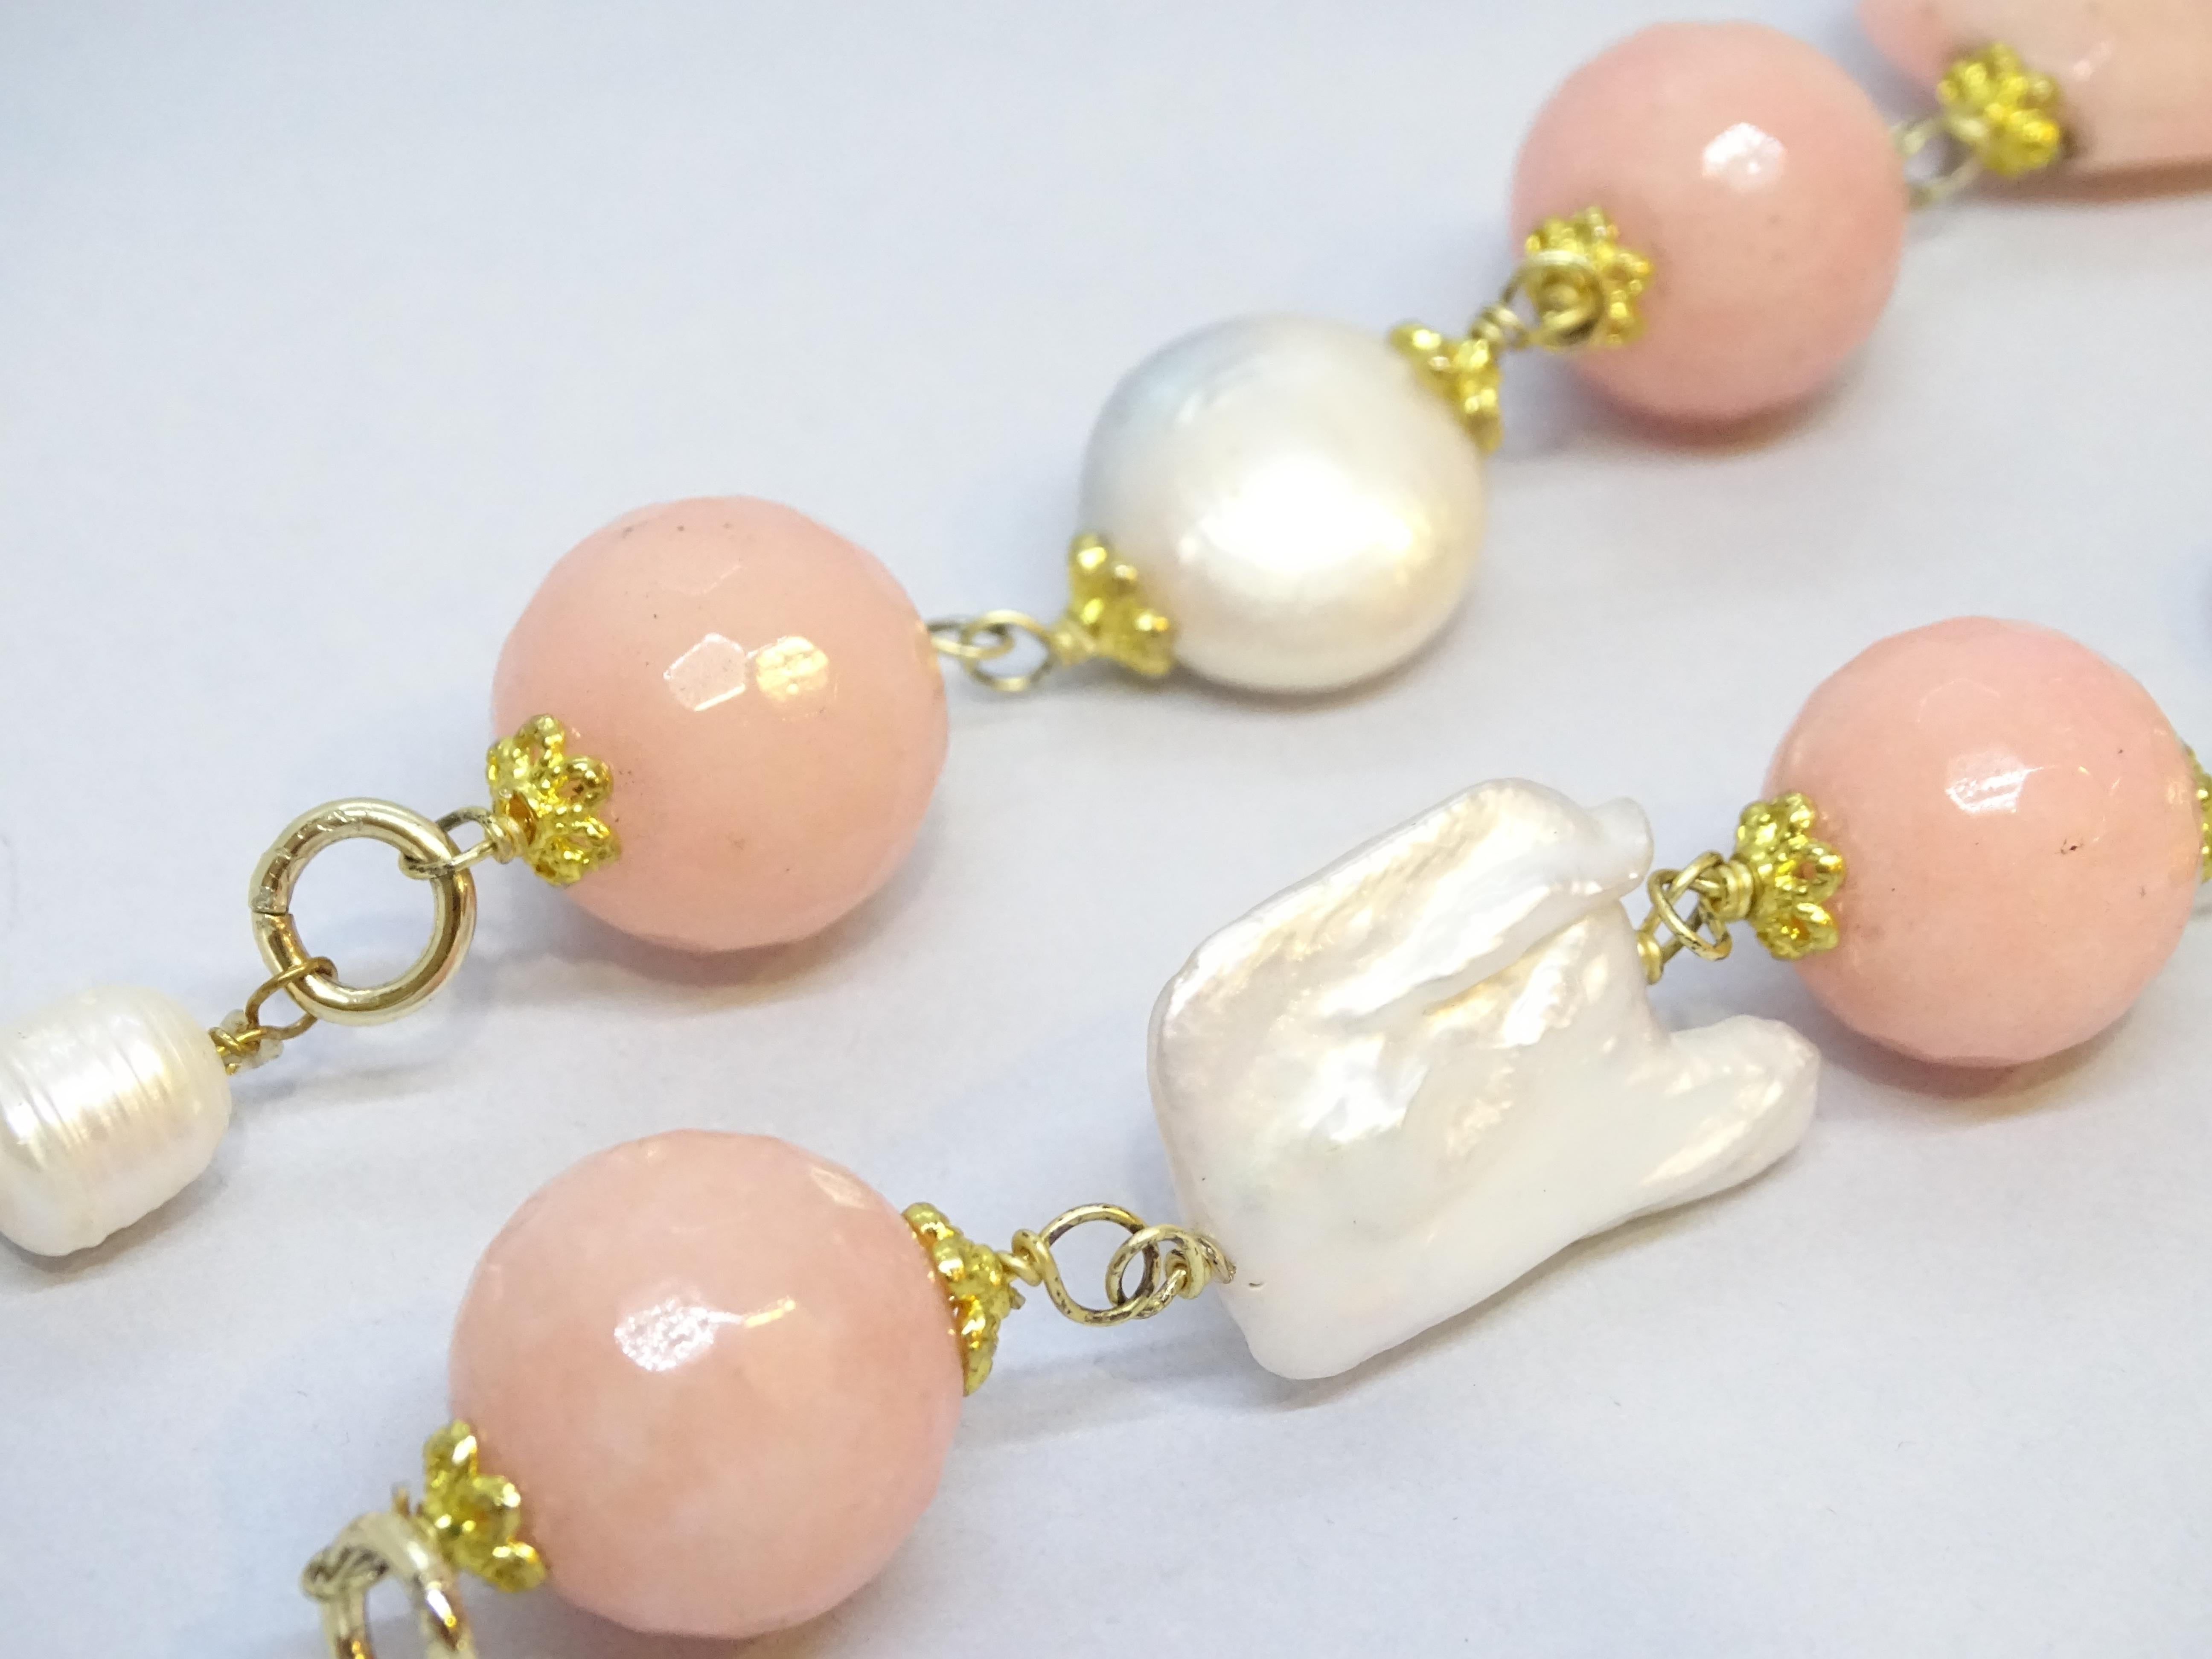 Italian necklace with baroque pearls, rose quartz and enamel For Sale 6